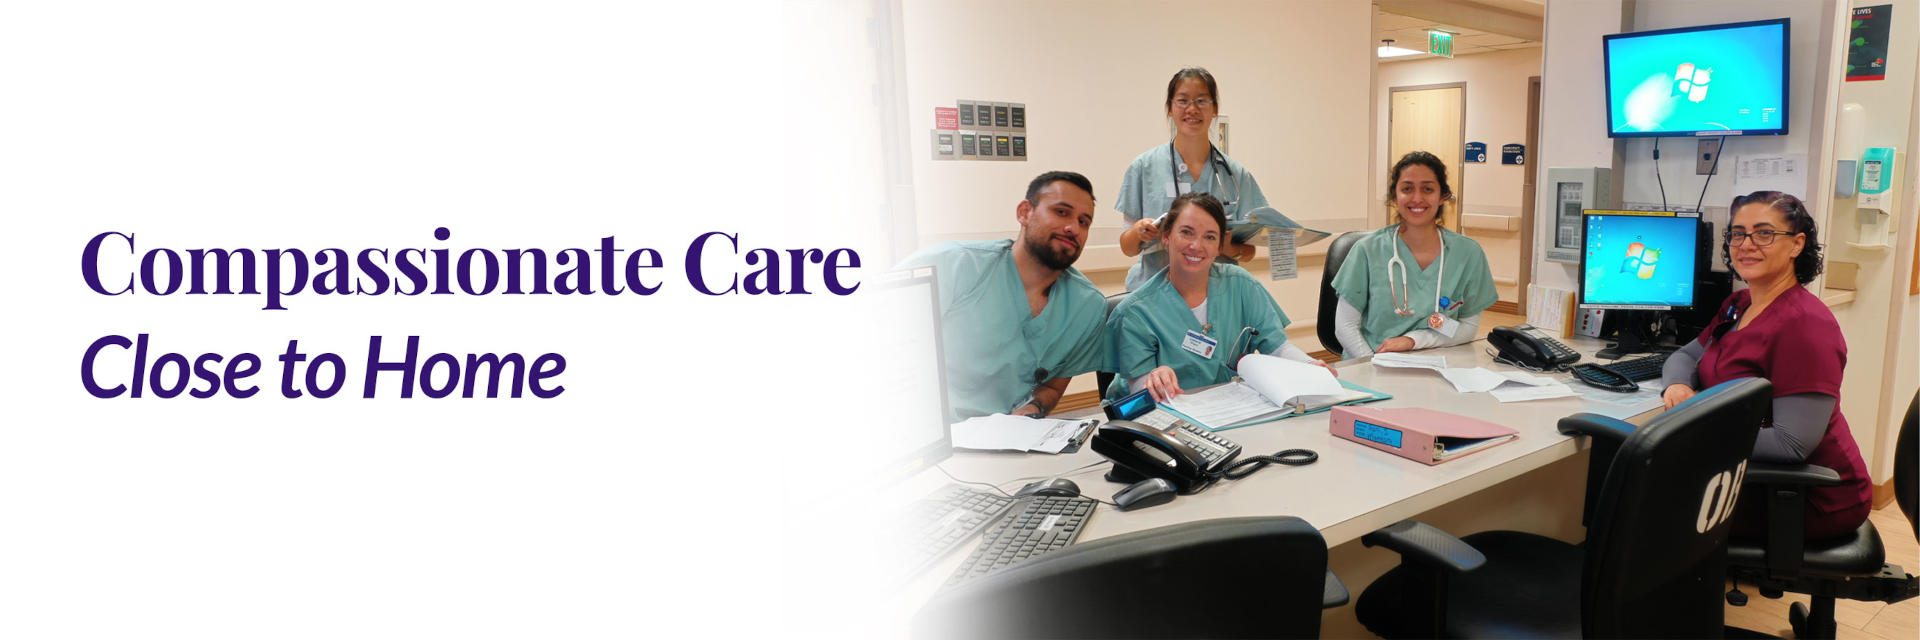 Banner picture of four Nurses sitting down and standing at one of the Nurses Station. There is four females and one male smiling.

Banner says:
Compassionate Care Close to Home